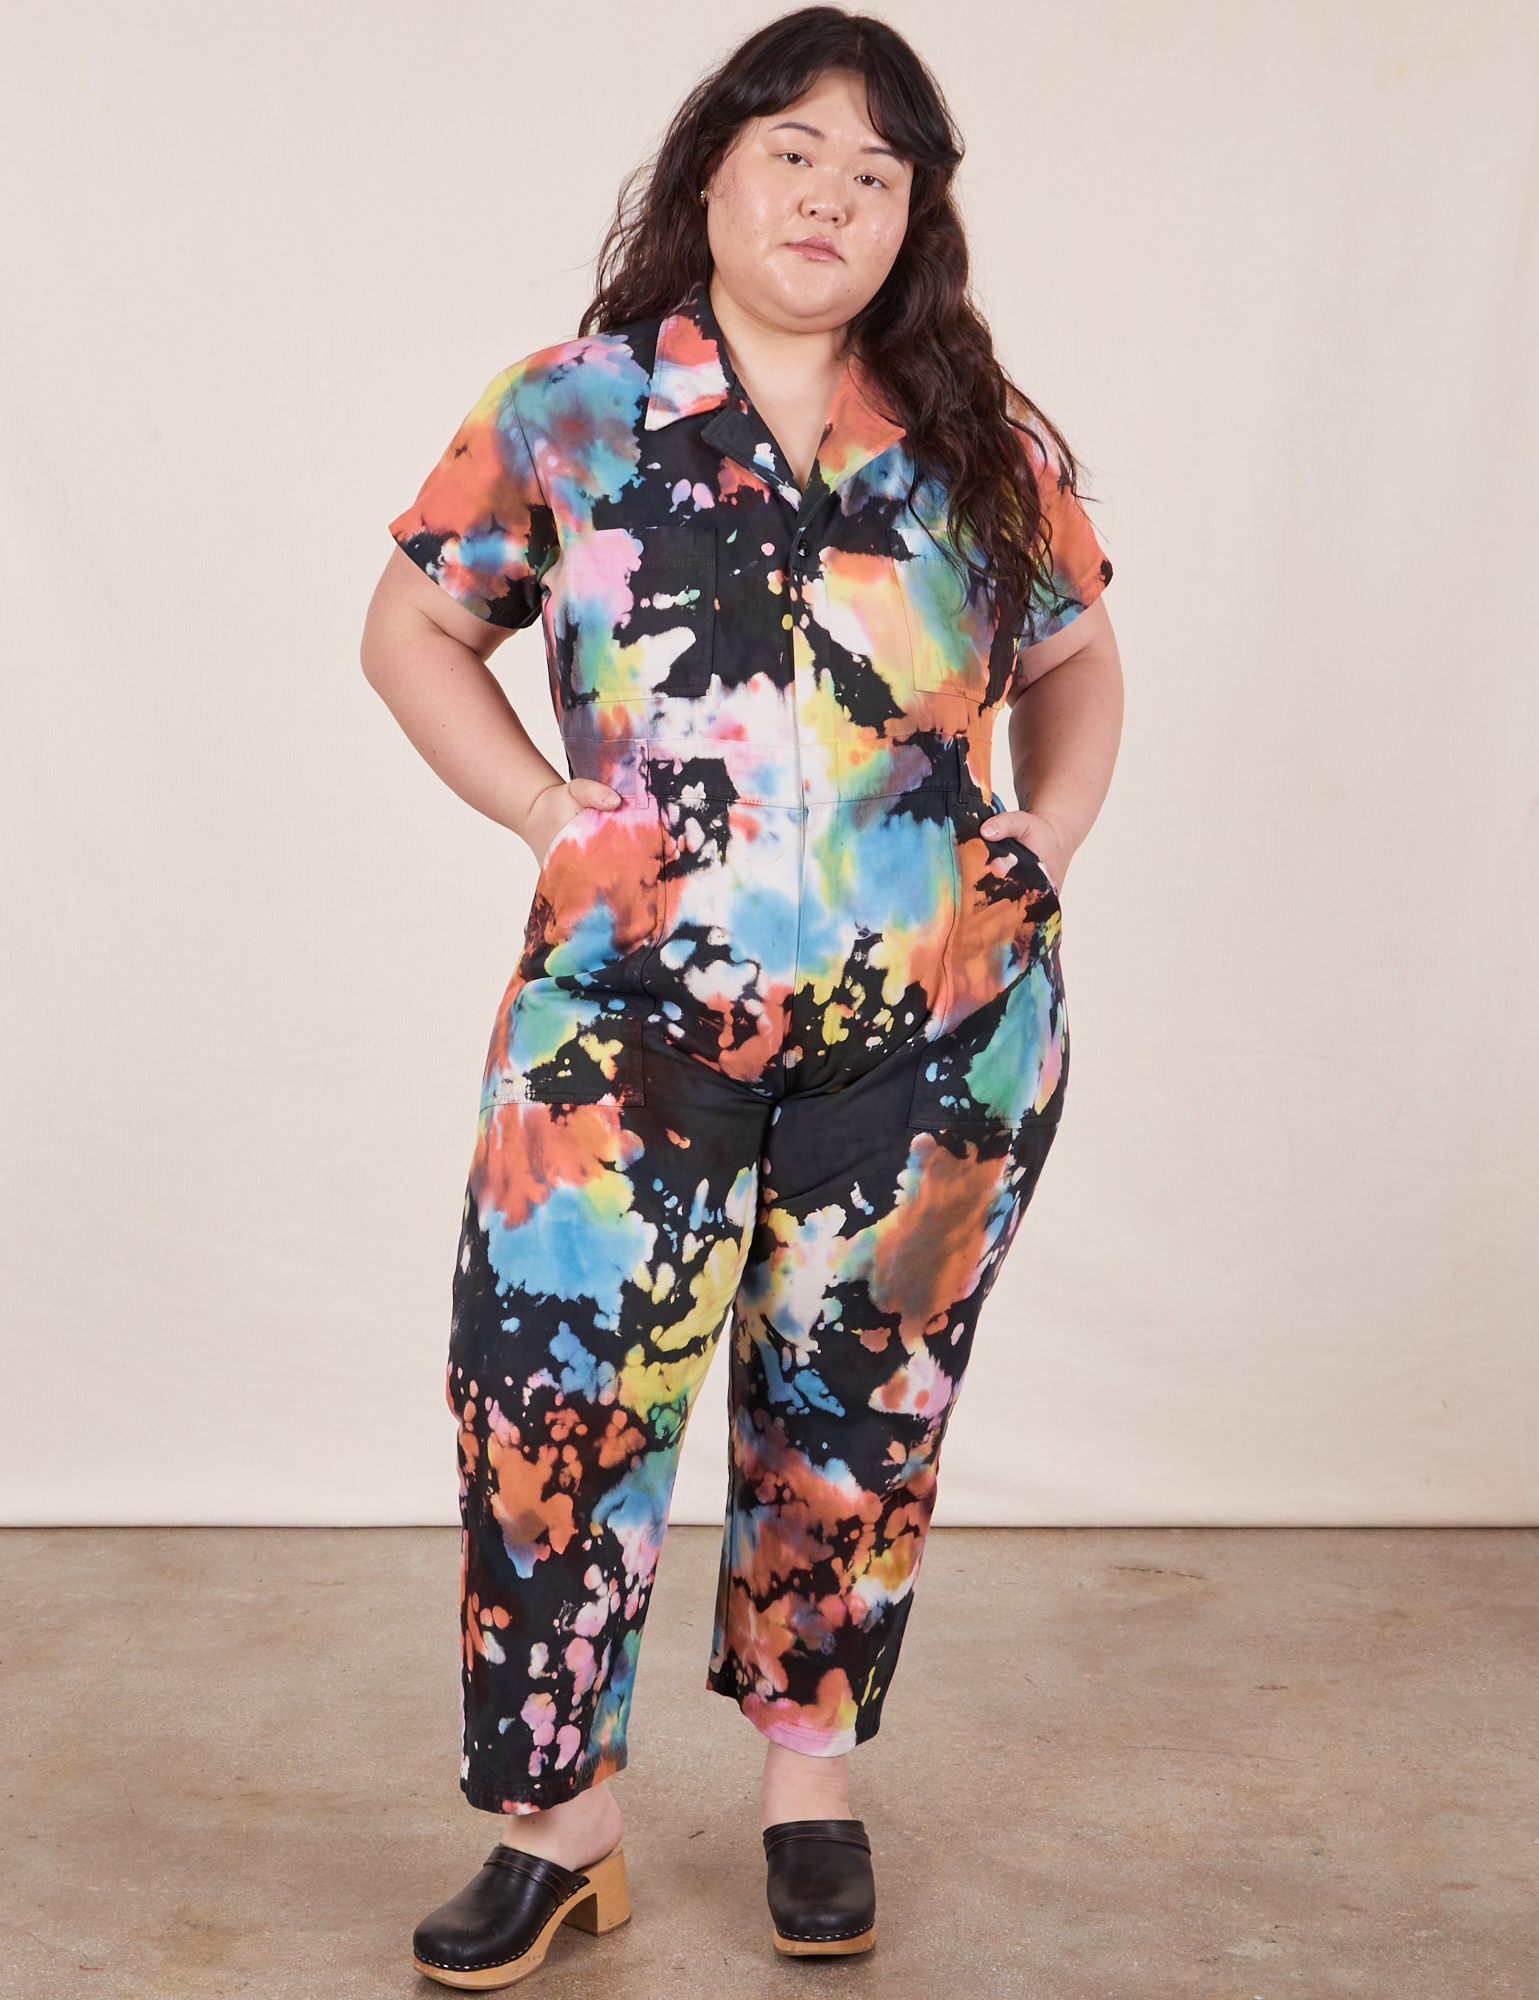 Ashley is 5'7" and wearing 1XL Petite Petite Short Sleeve Jumpsuit in Rainbow Magic Waters